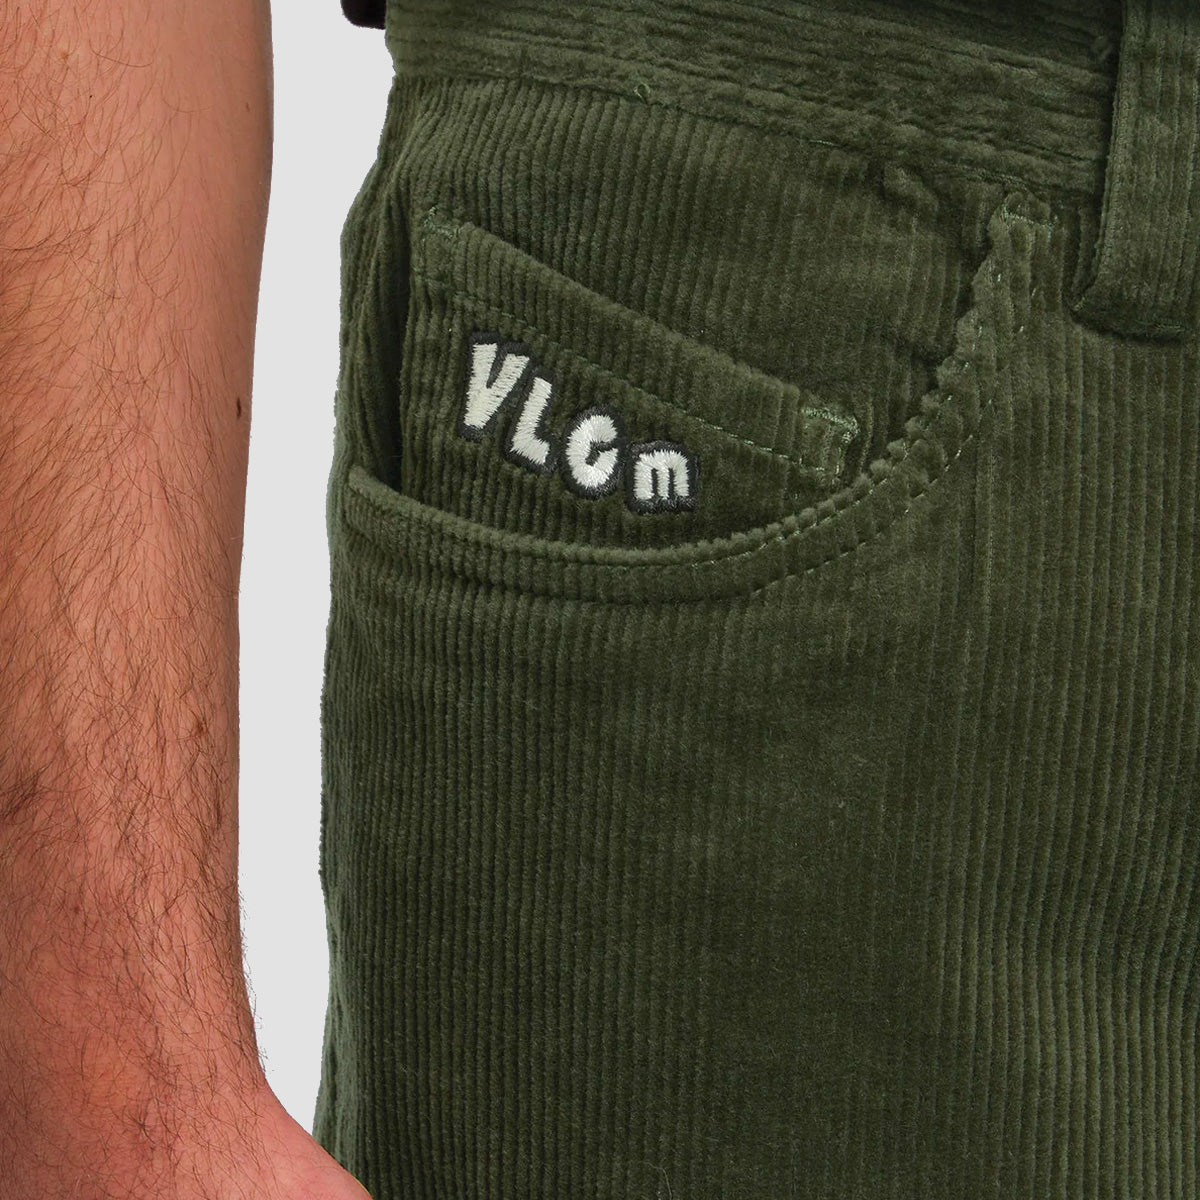 Volcom Skate Vitals Modown Relaxed Tapered Pants Squadron Green